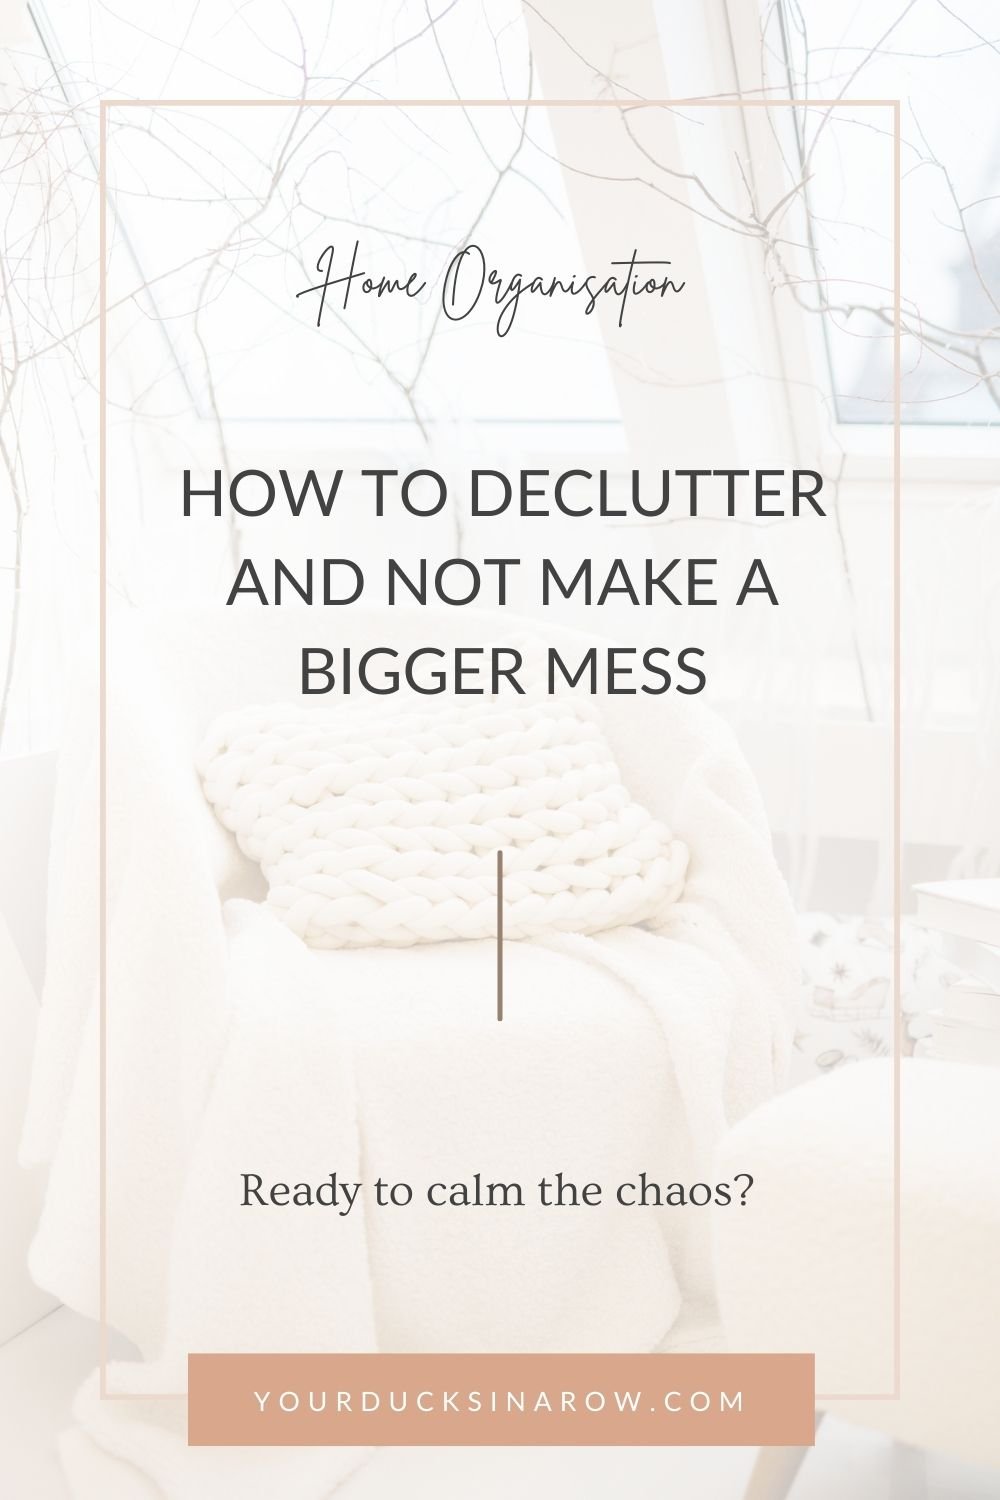 How to Declutter and Not Make a Bigger Mess